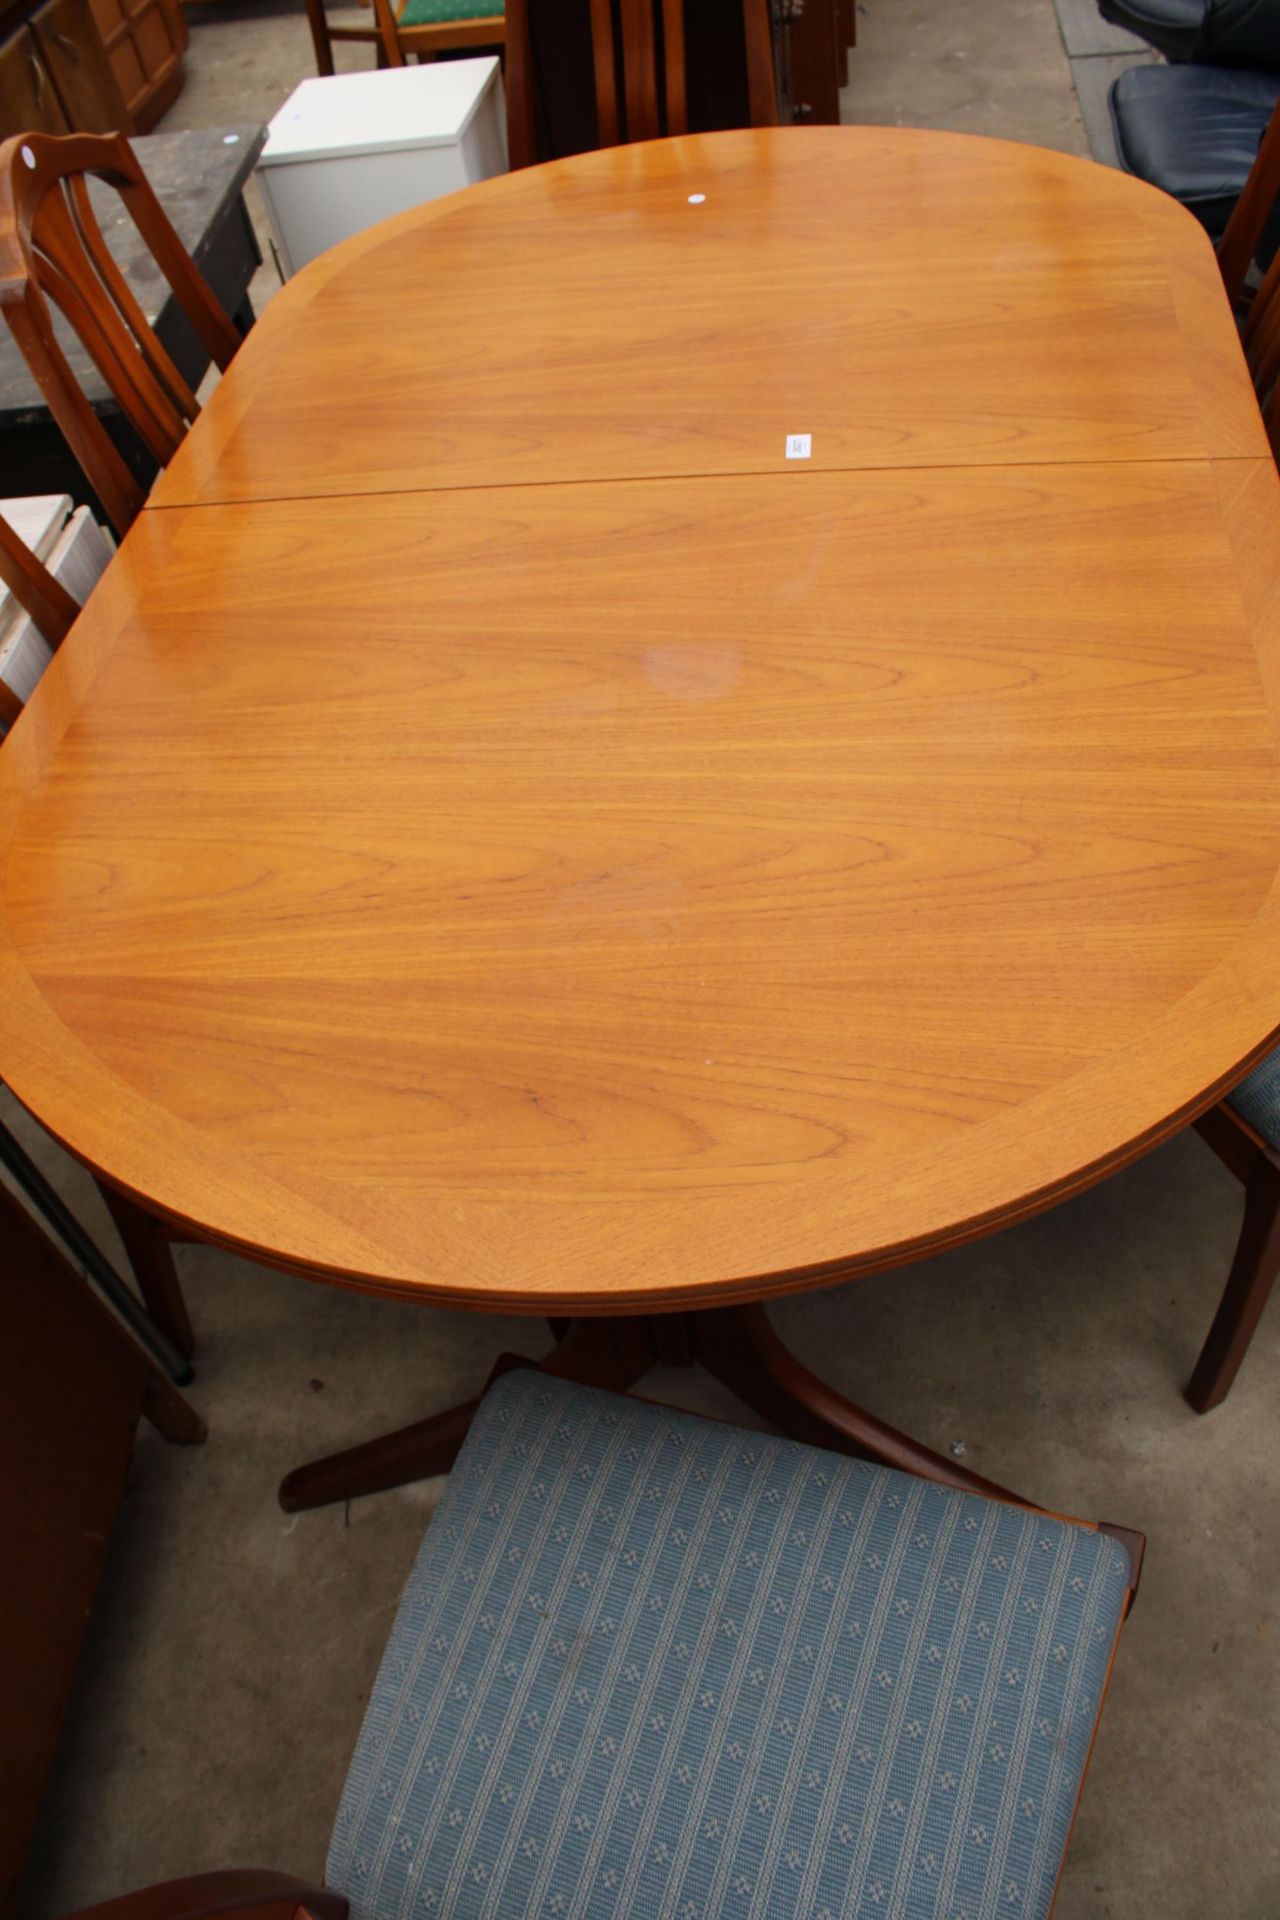 A NATHAN RETRO TEAK EXTENDING DINING TABLE 64" X 41" (LEAF 18") ON WHALE FIN LEGS AND SIX DINING - Image 3 of 5